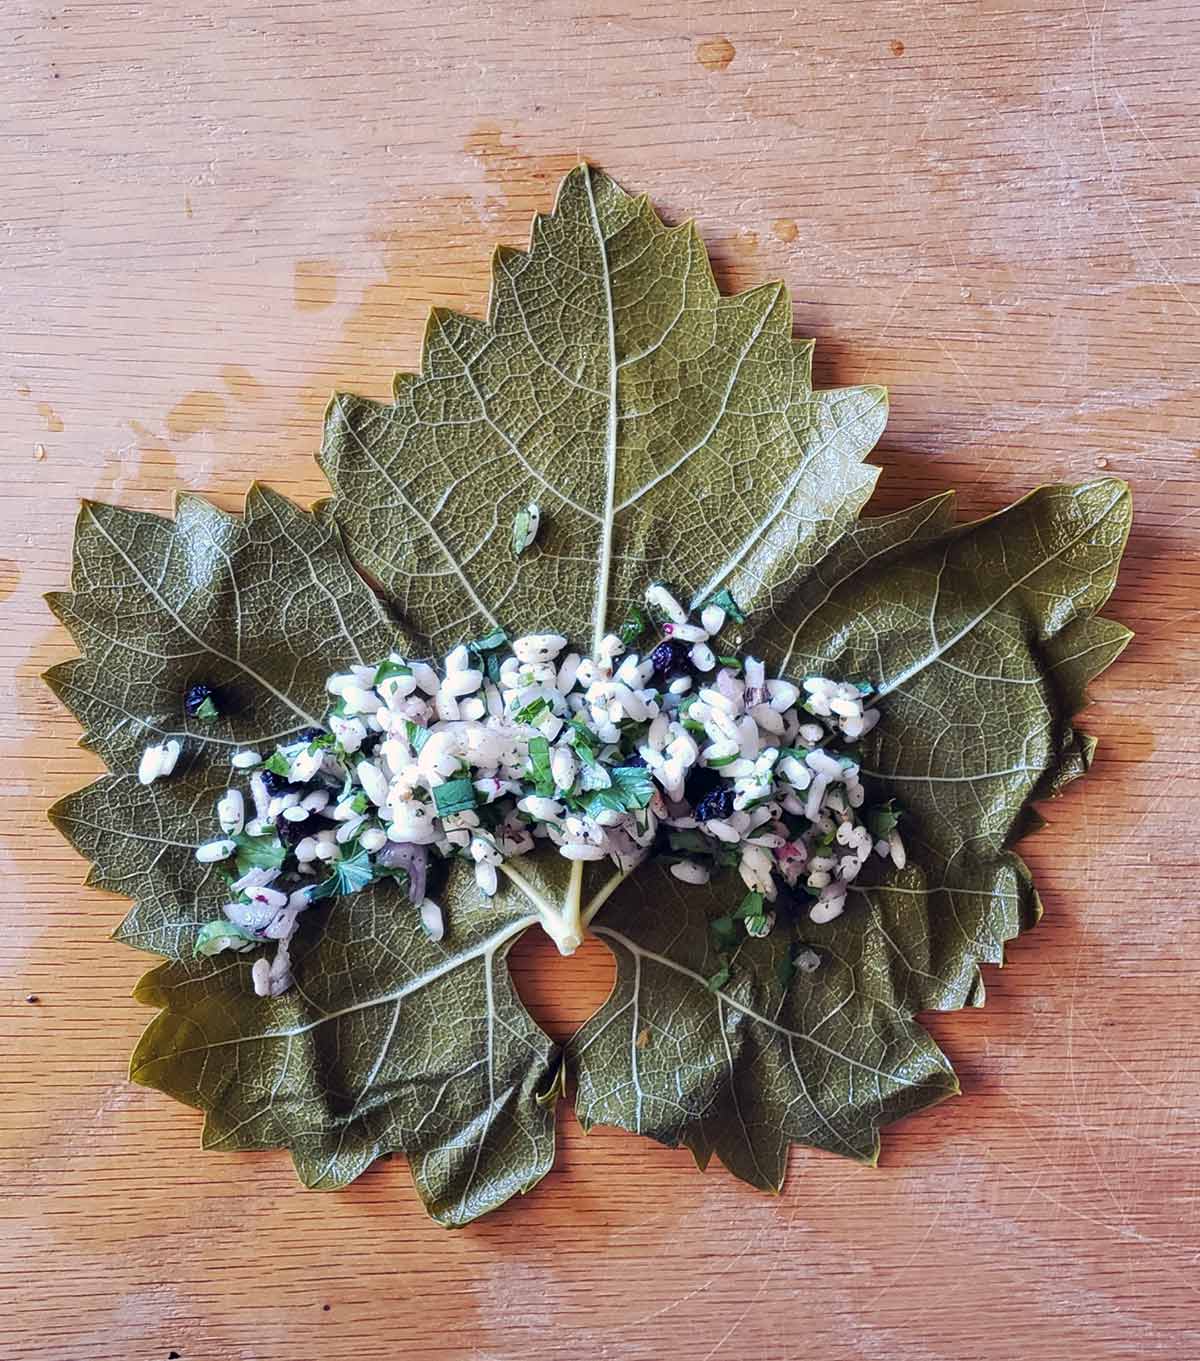 A grape leaf ready to be folded into dolmades